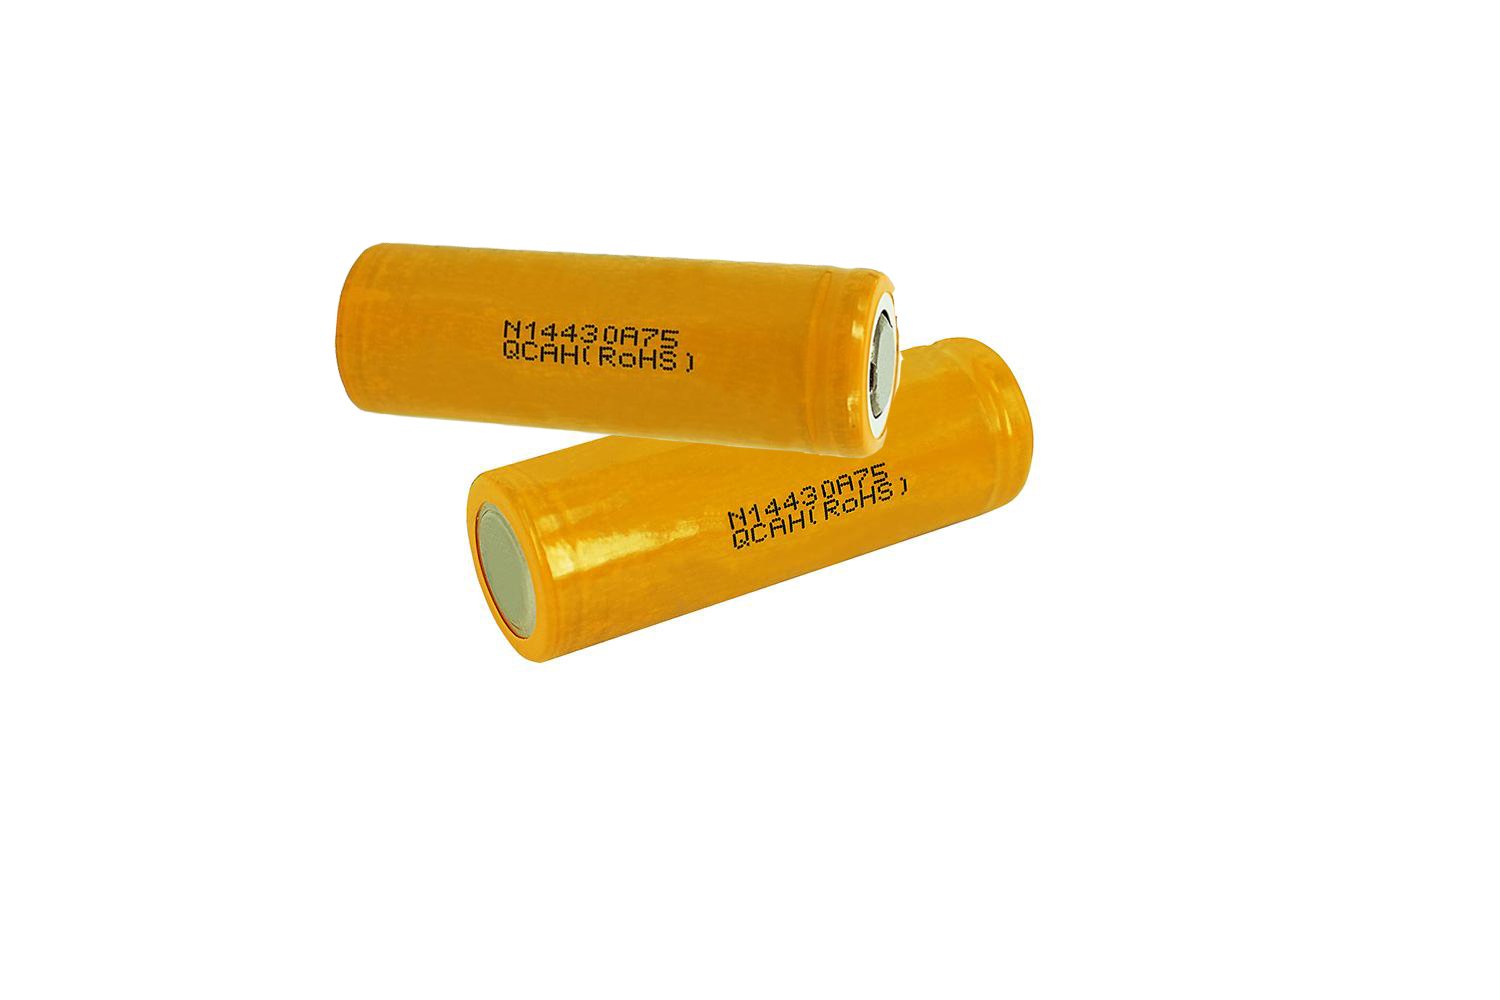 two 14430 batteries